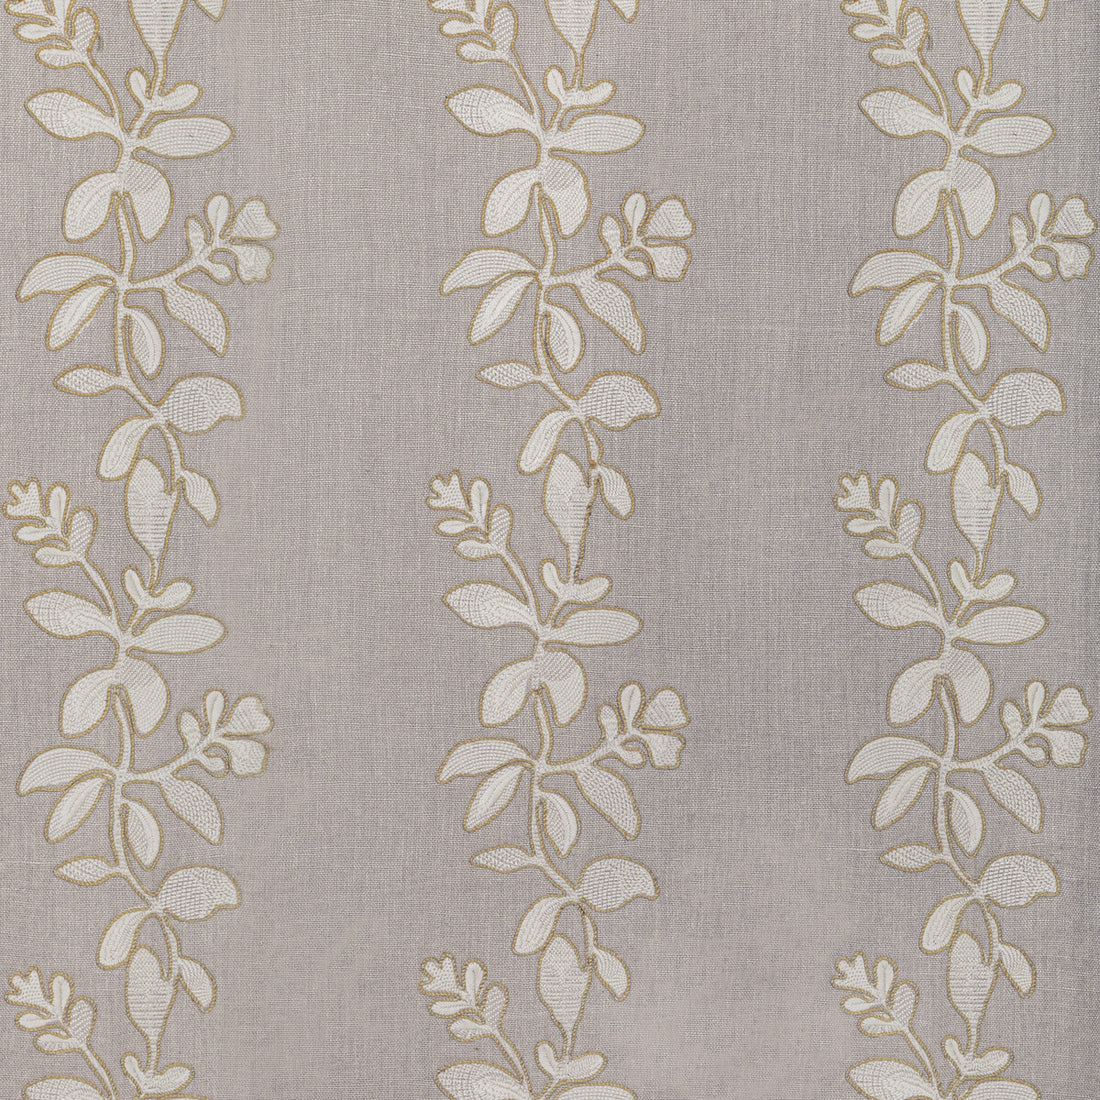 Gingerflower fabric in feather color - pattern 36380.1101.0 - by Kravet Couture in the Barbara Barry Ojai collection